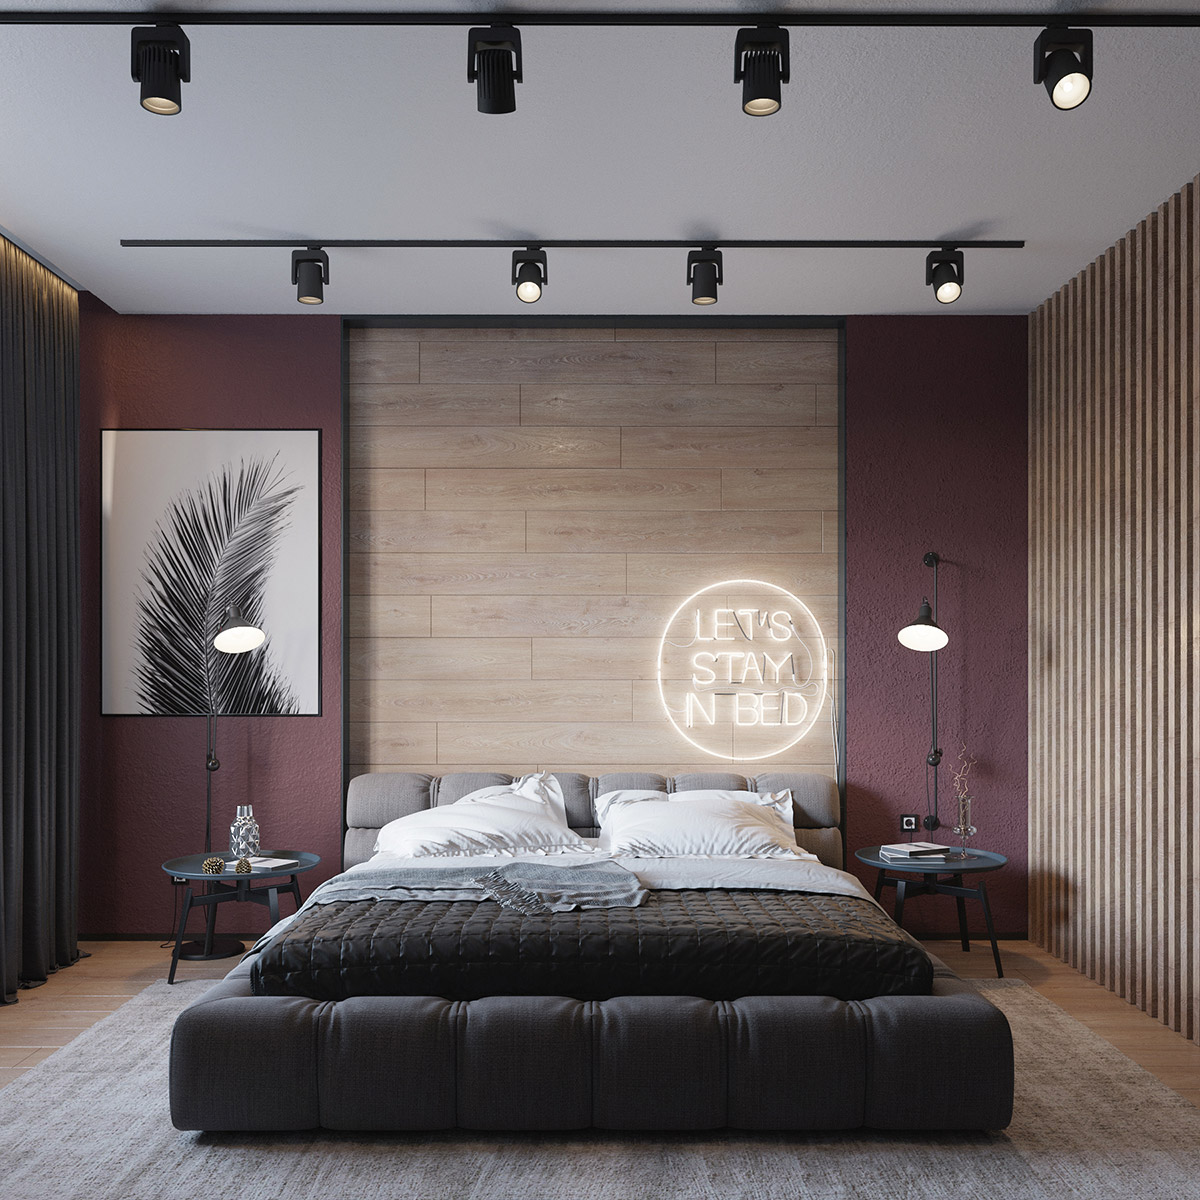 Light graphite color - is it good for the bedroom?